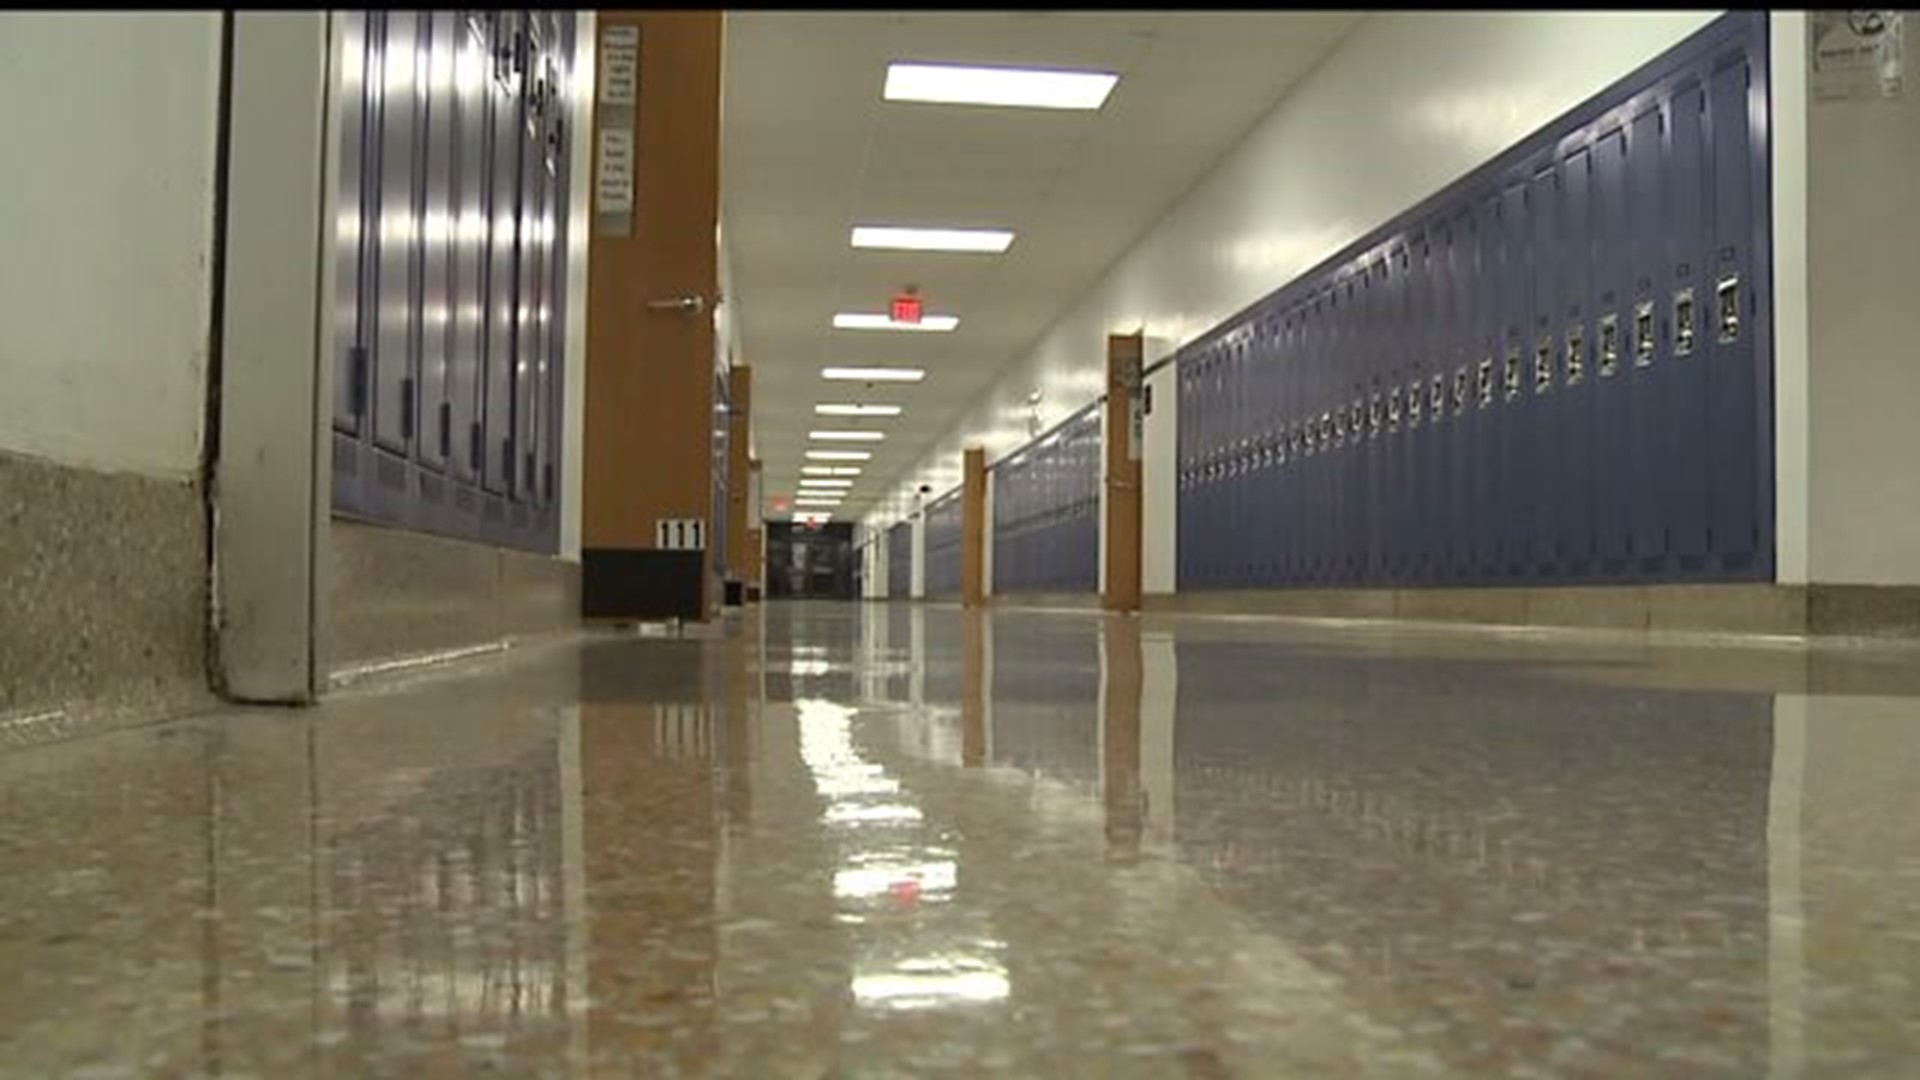 How `Every Student Succeeds Act` will benefit Central Pa. schools